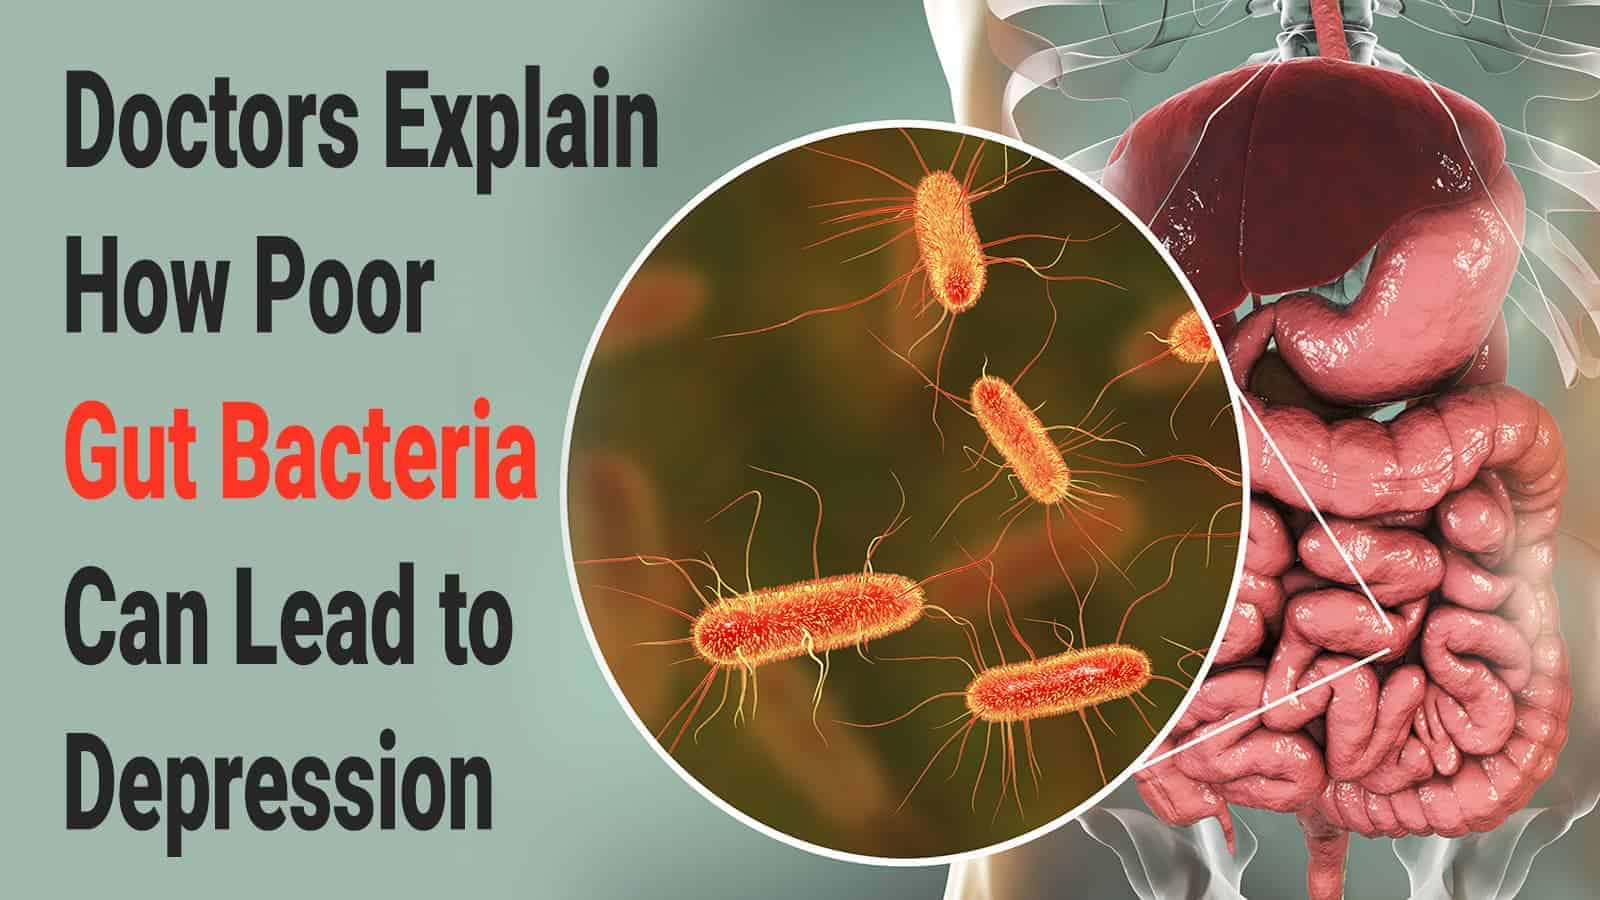 Doctors Explain How Poor Gut Bacteria Can Lead to Depression